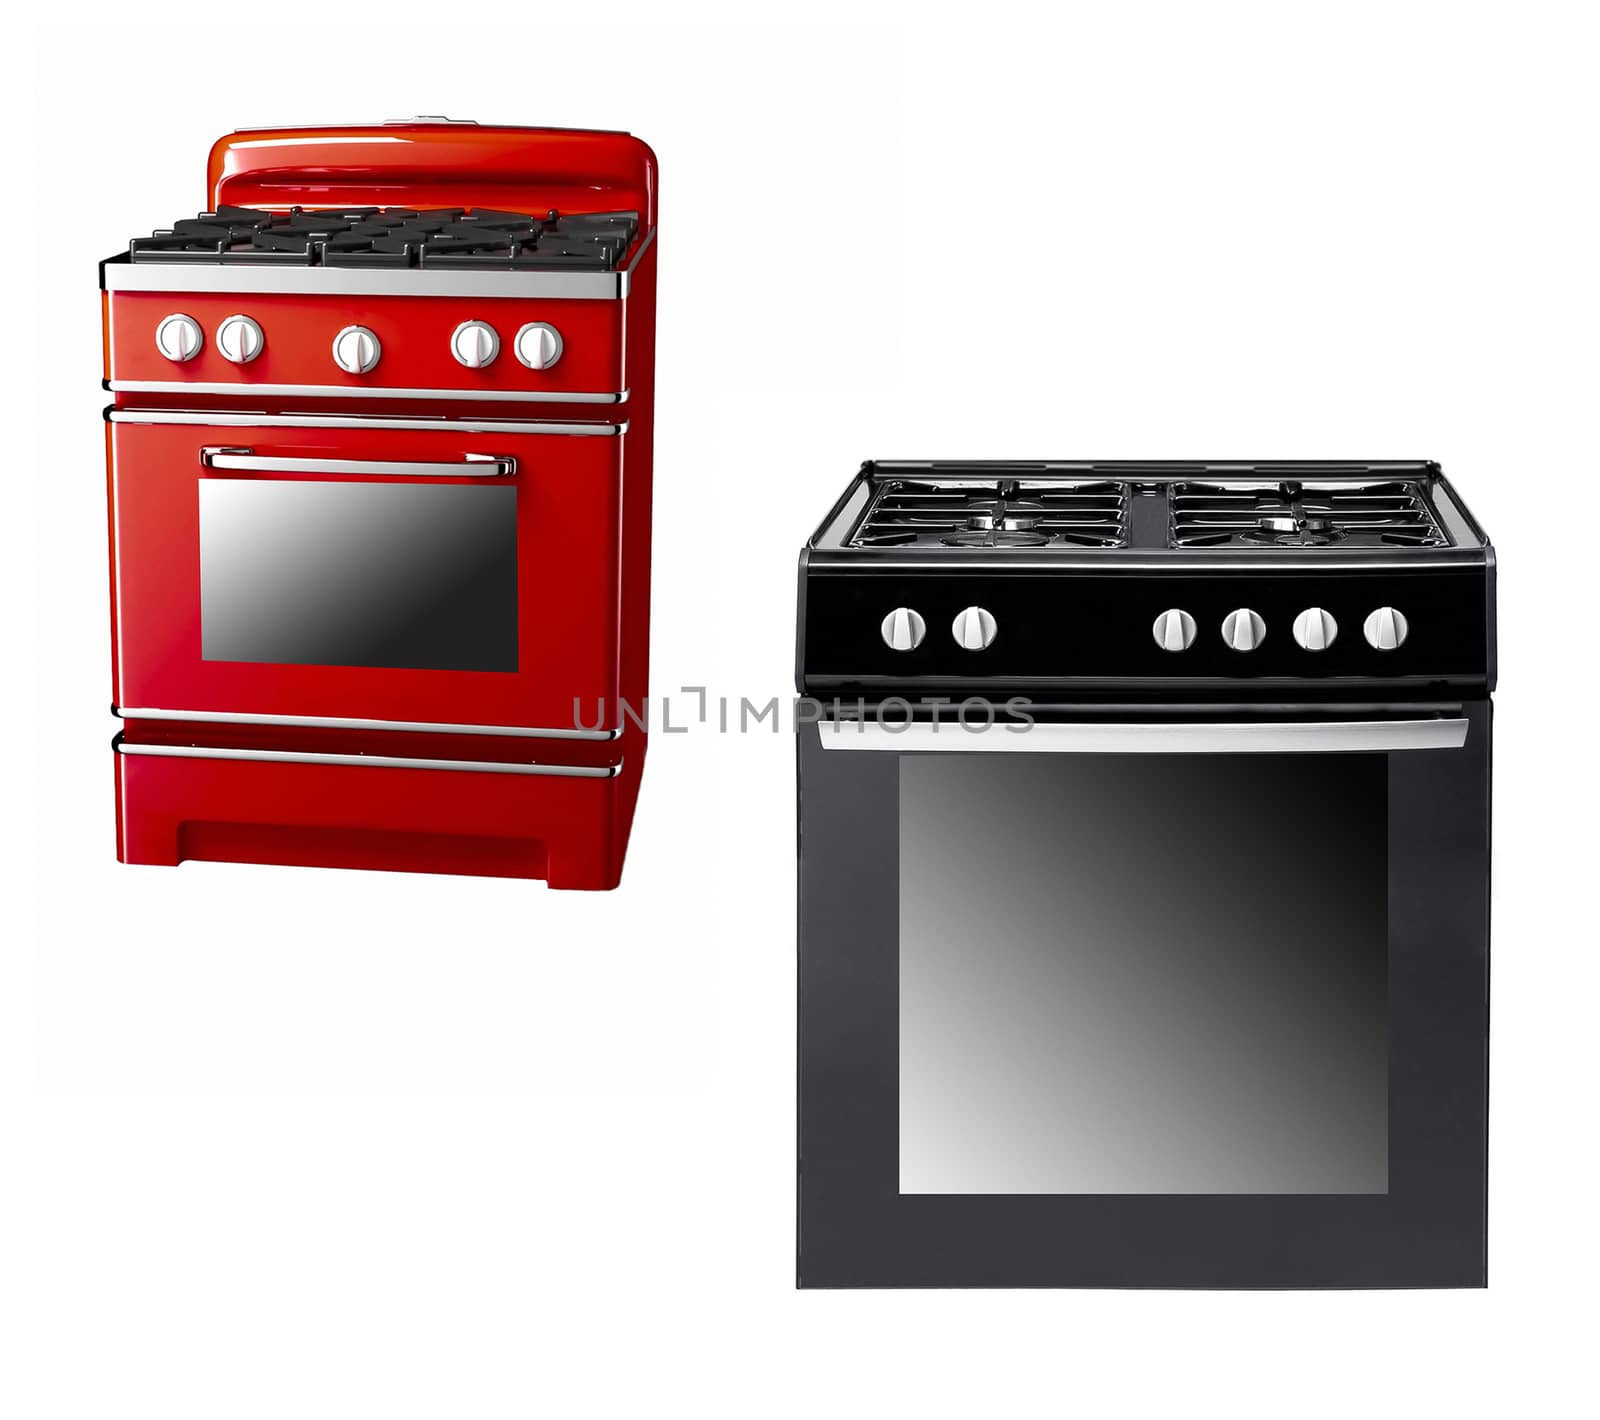 black and red gas cooker over the white background